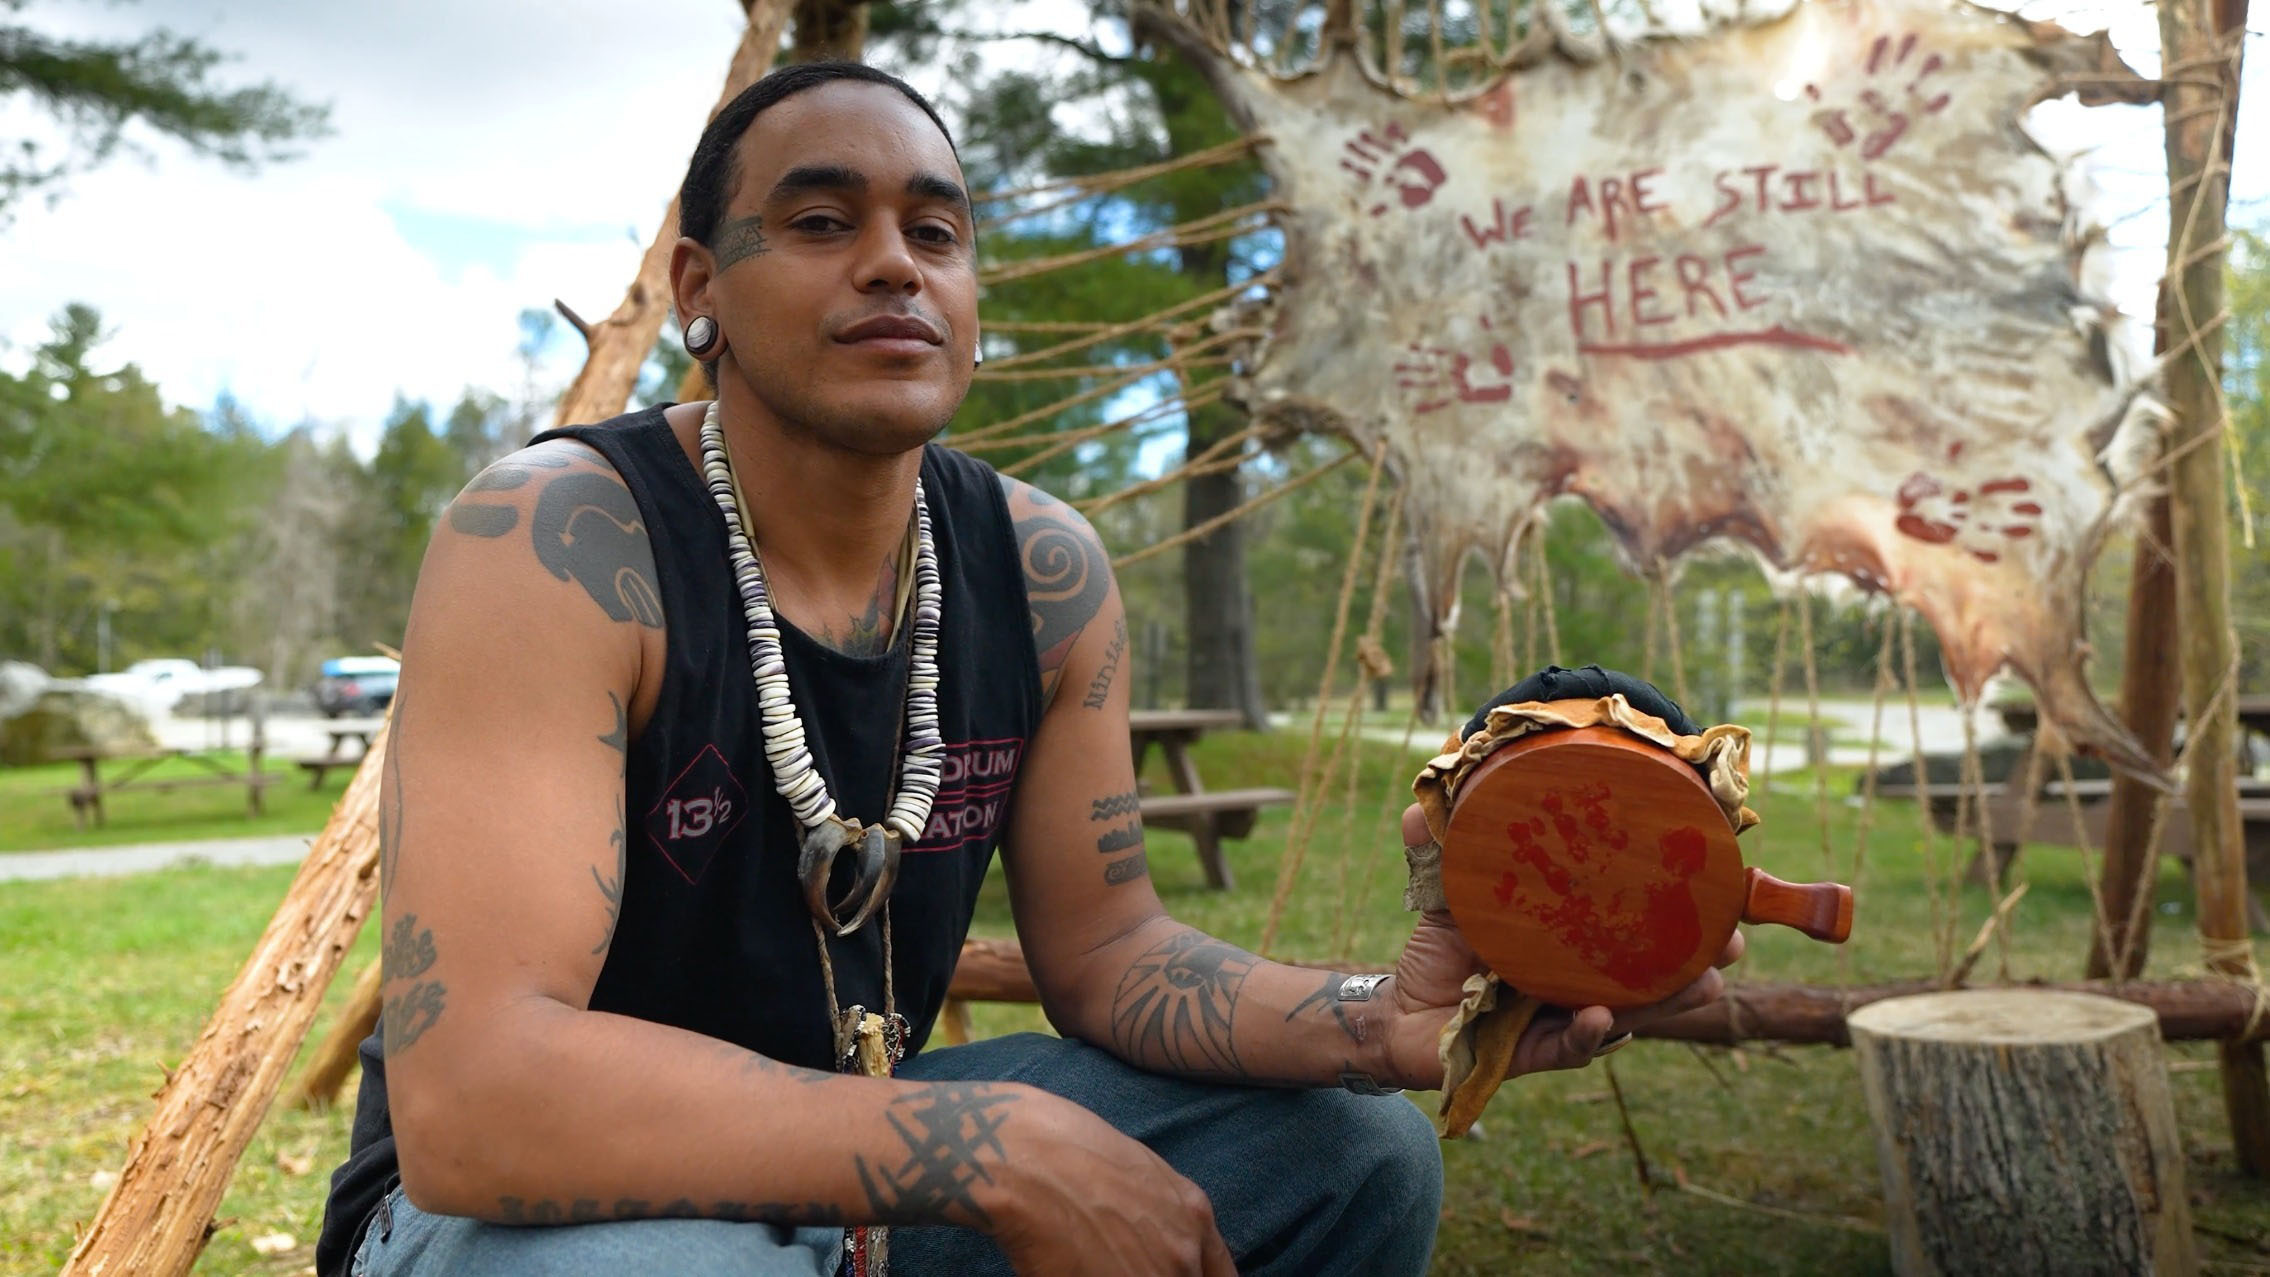 Andre Strongbearheart Gaines Jr. at his homesite installation at Jacob's Pillow, May 2022